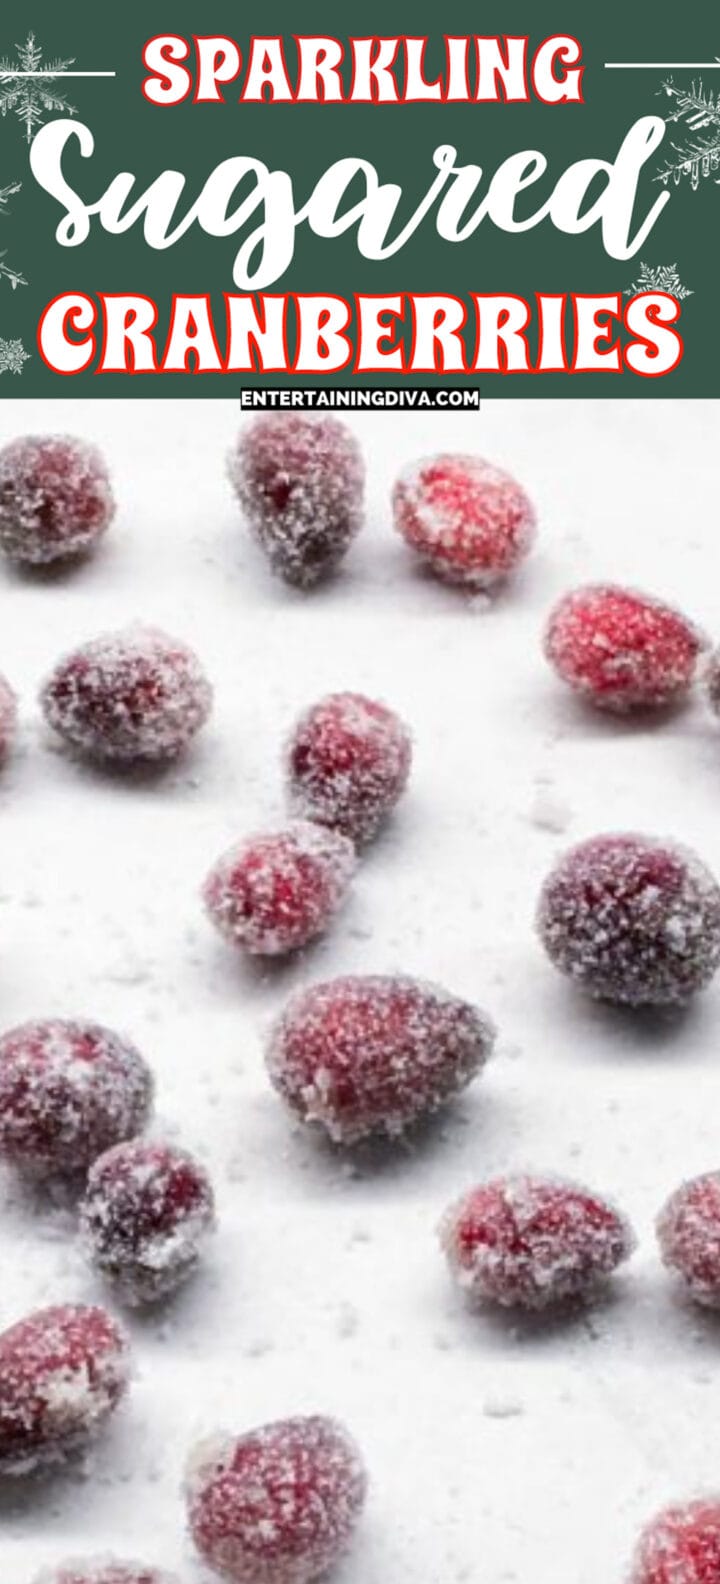 Sparkling Sugared Cranberries With Maple Syrup